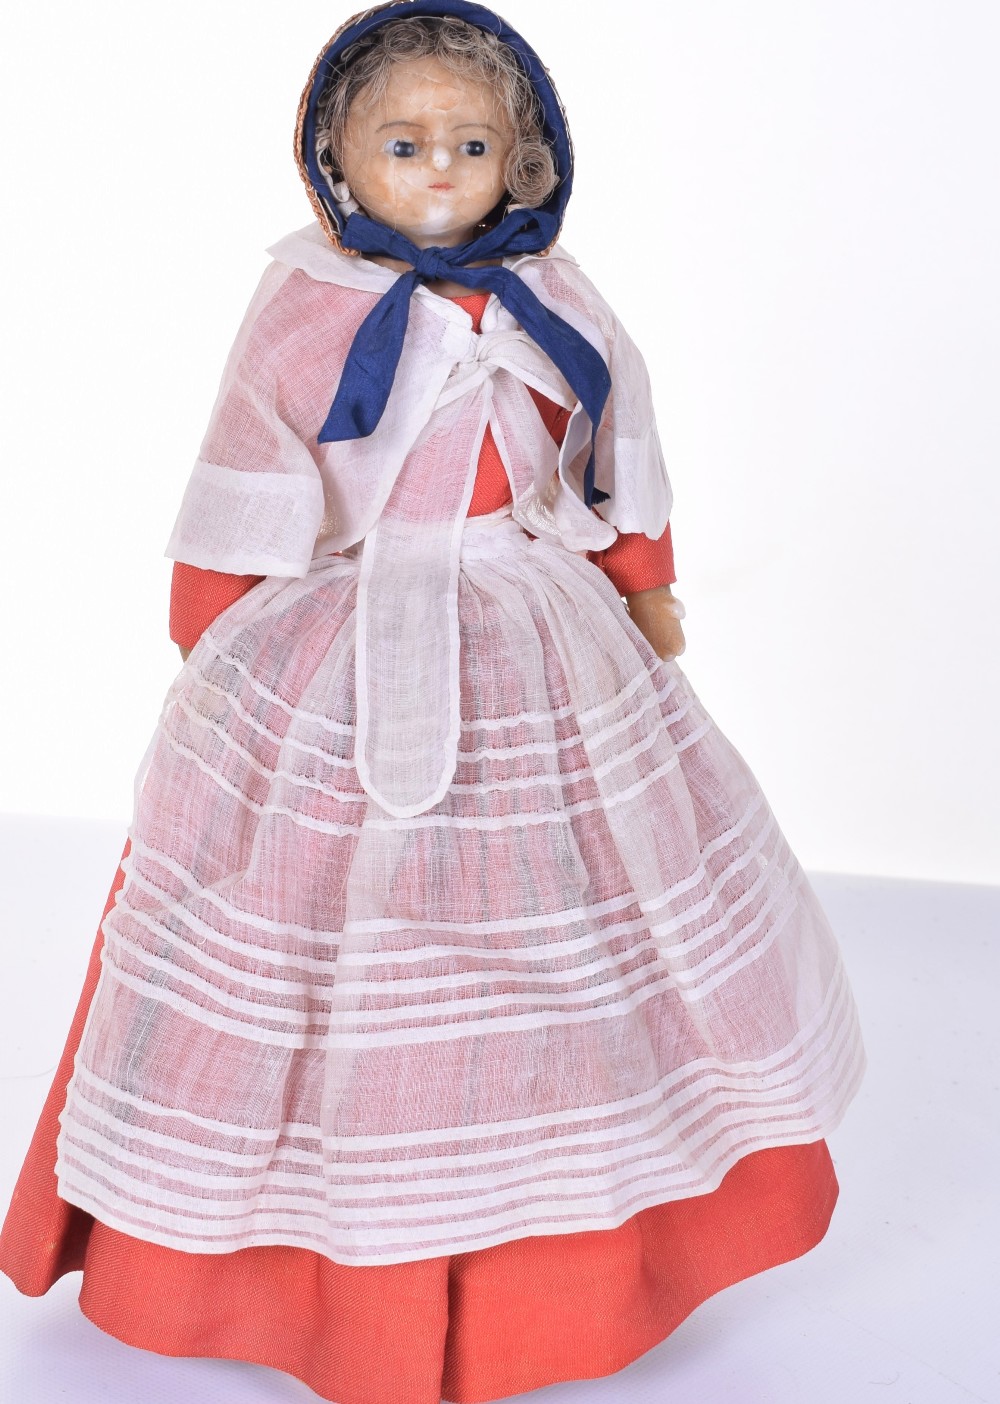 Wax over composition shoulder head doll in uniform of ‘The Red Maids School’, Bristol, English circa